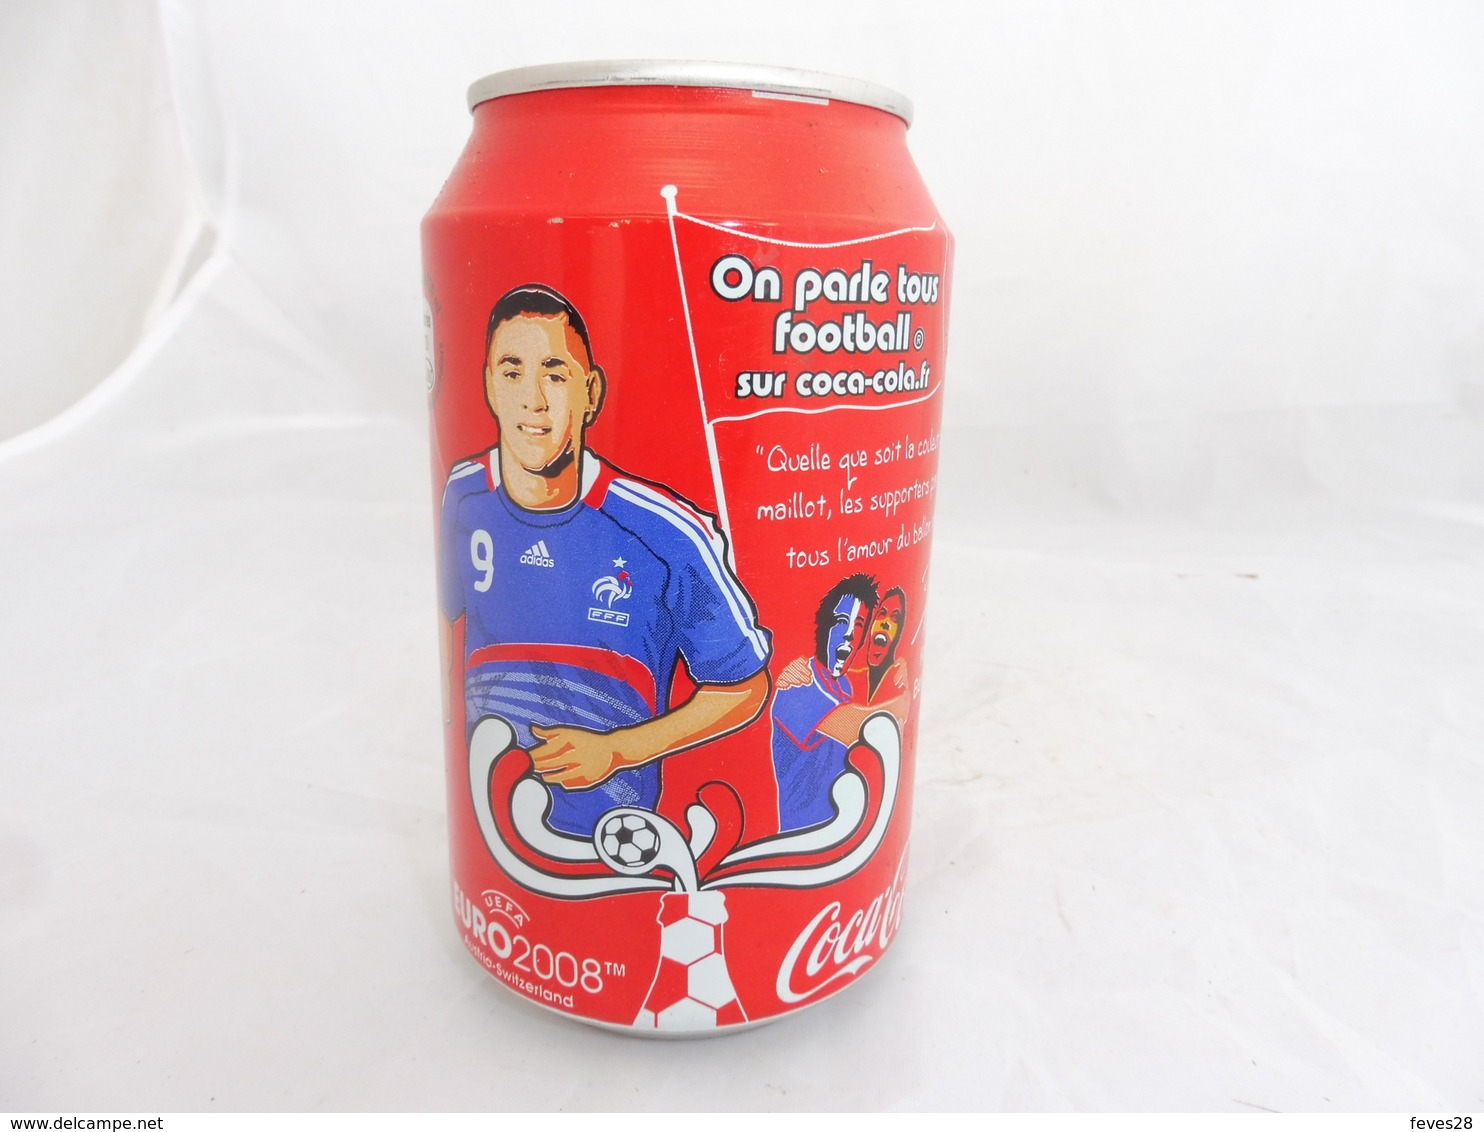 COCA COLA® CANETTE VIDE EURO 2008 ON PARLE TOUS FOOTBALL KARIM BENZEMA 2009 FRANCE 33 Cl - Cannettes